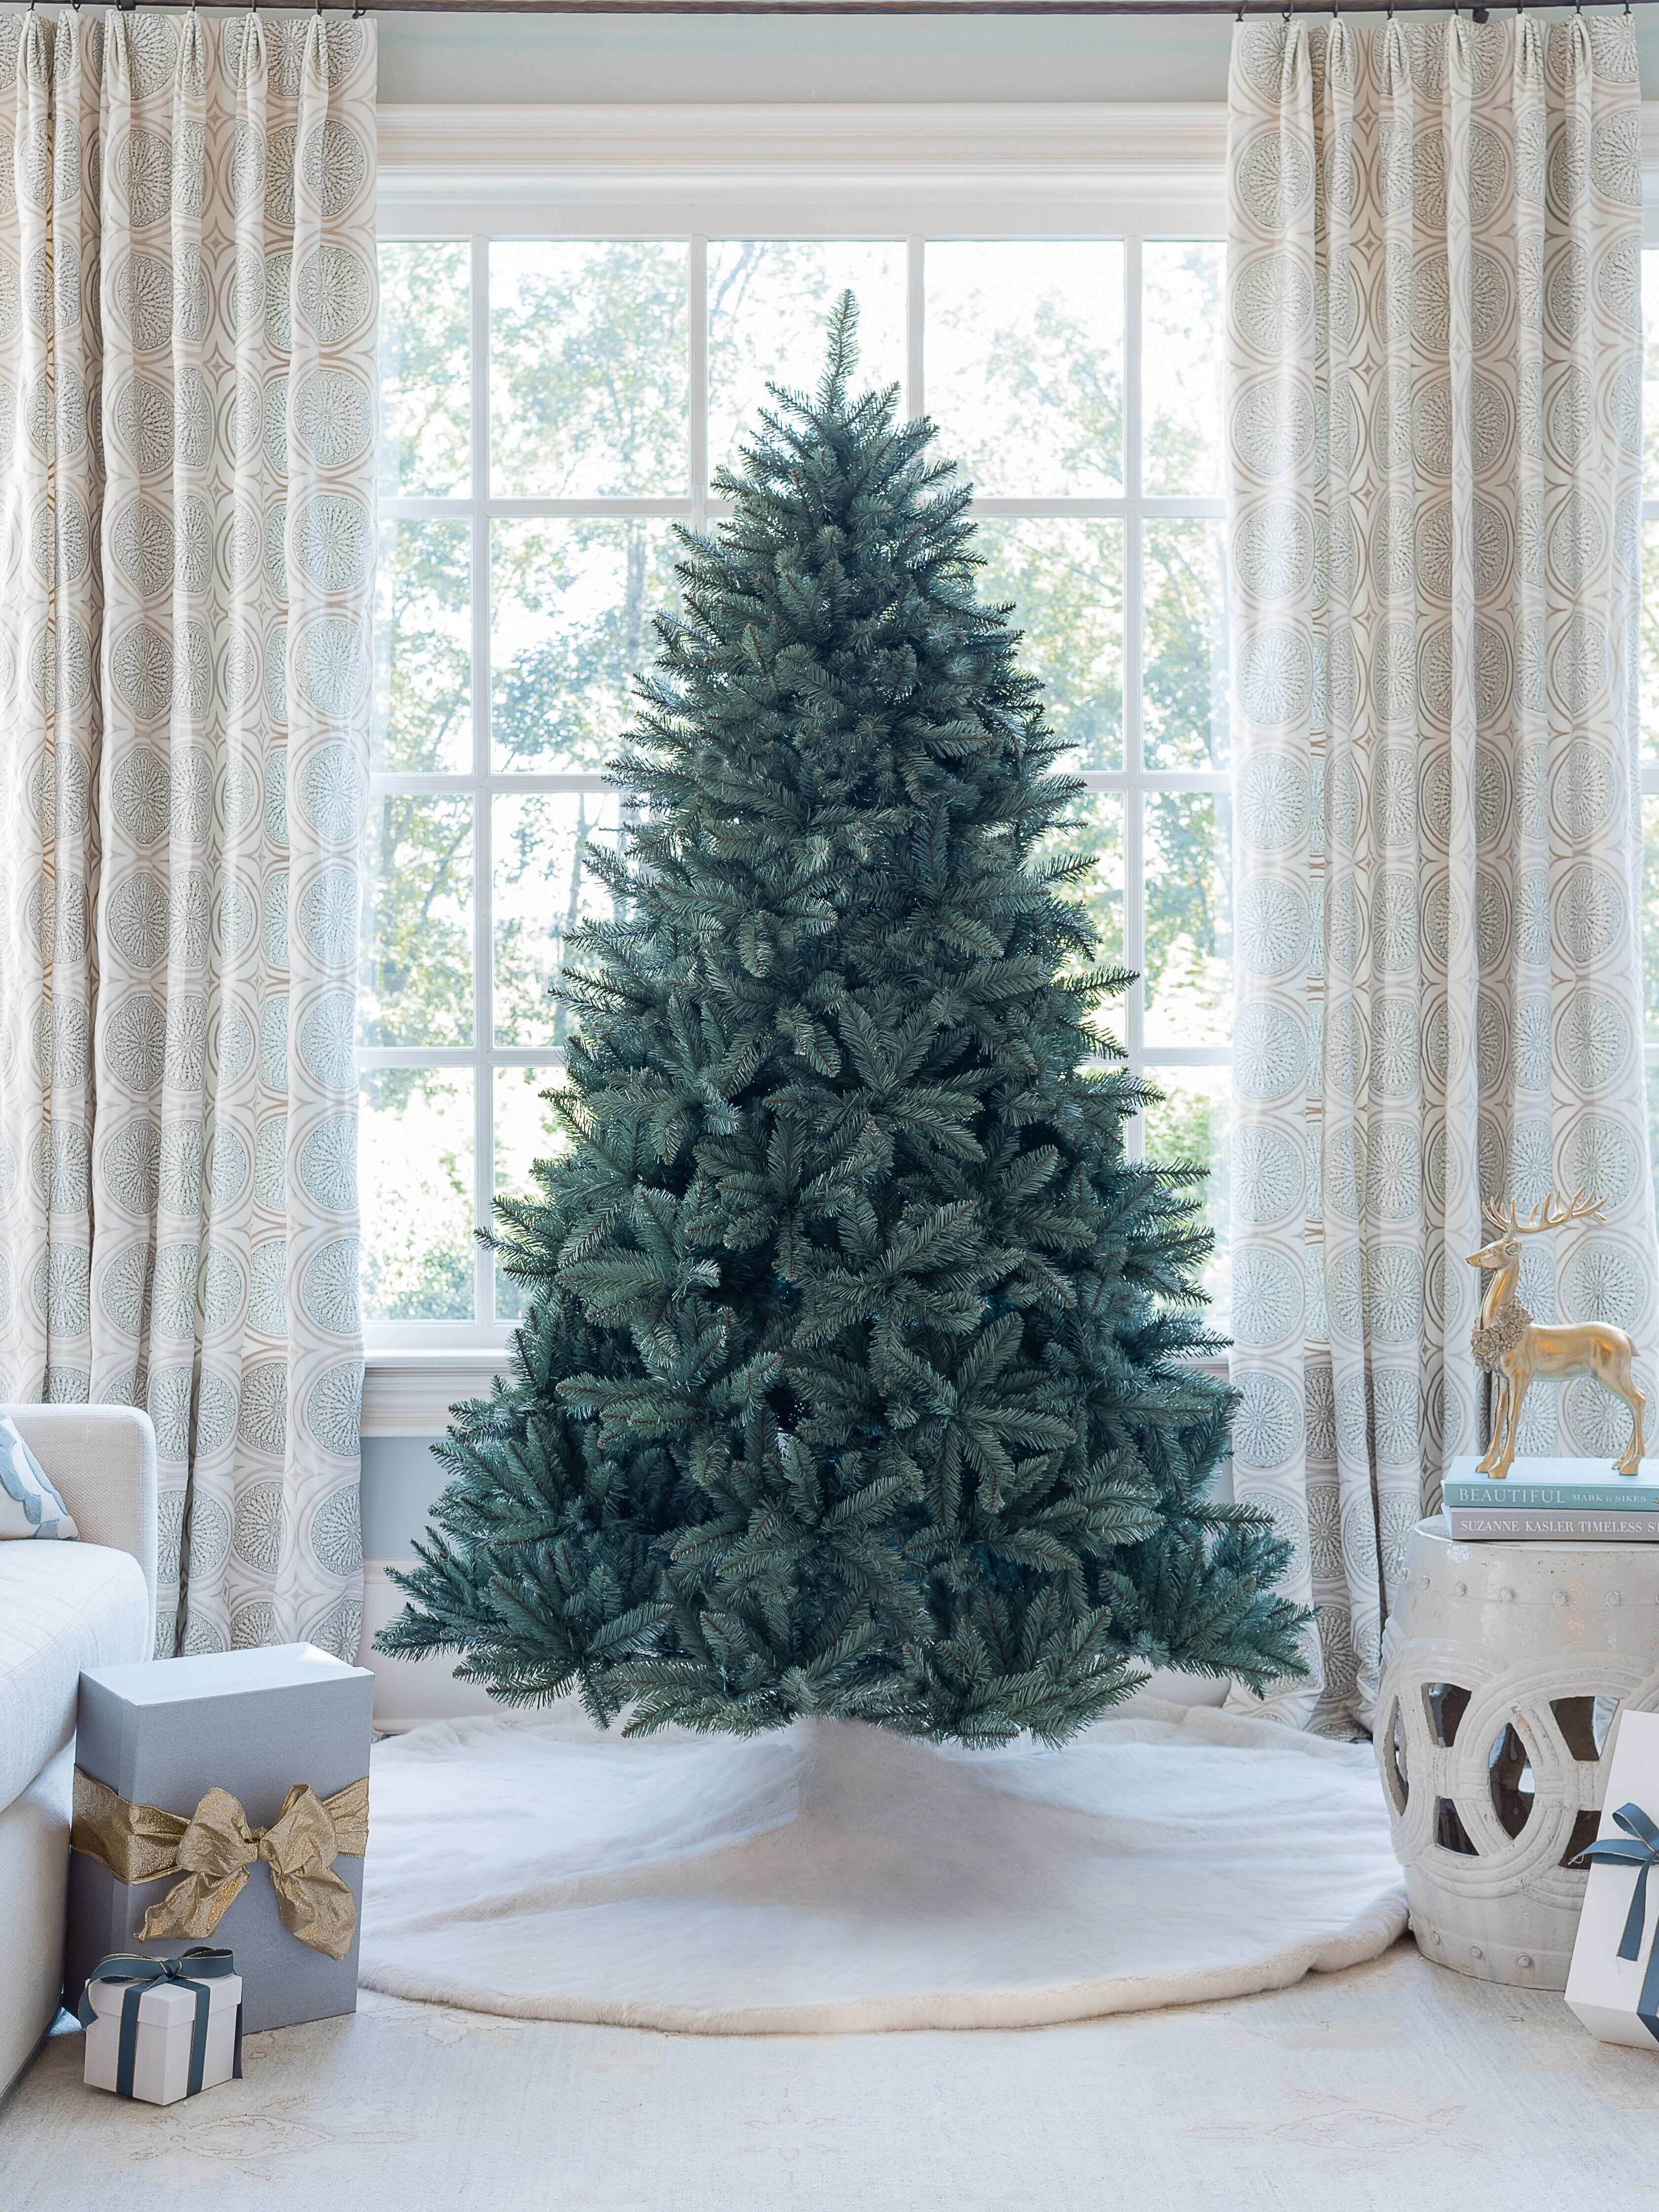 7 Foot Tribeca Blue Spruce Artificial Christmas Tree 550 LED Lights